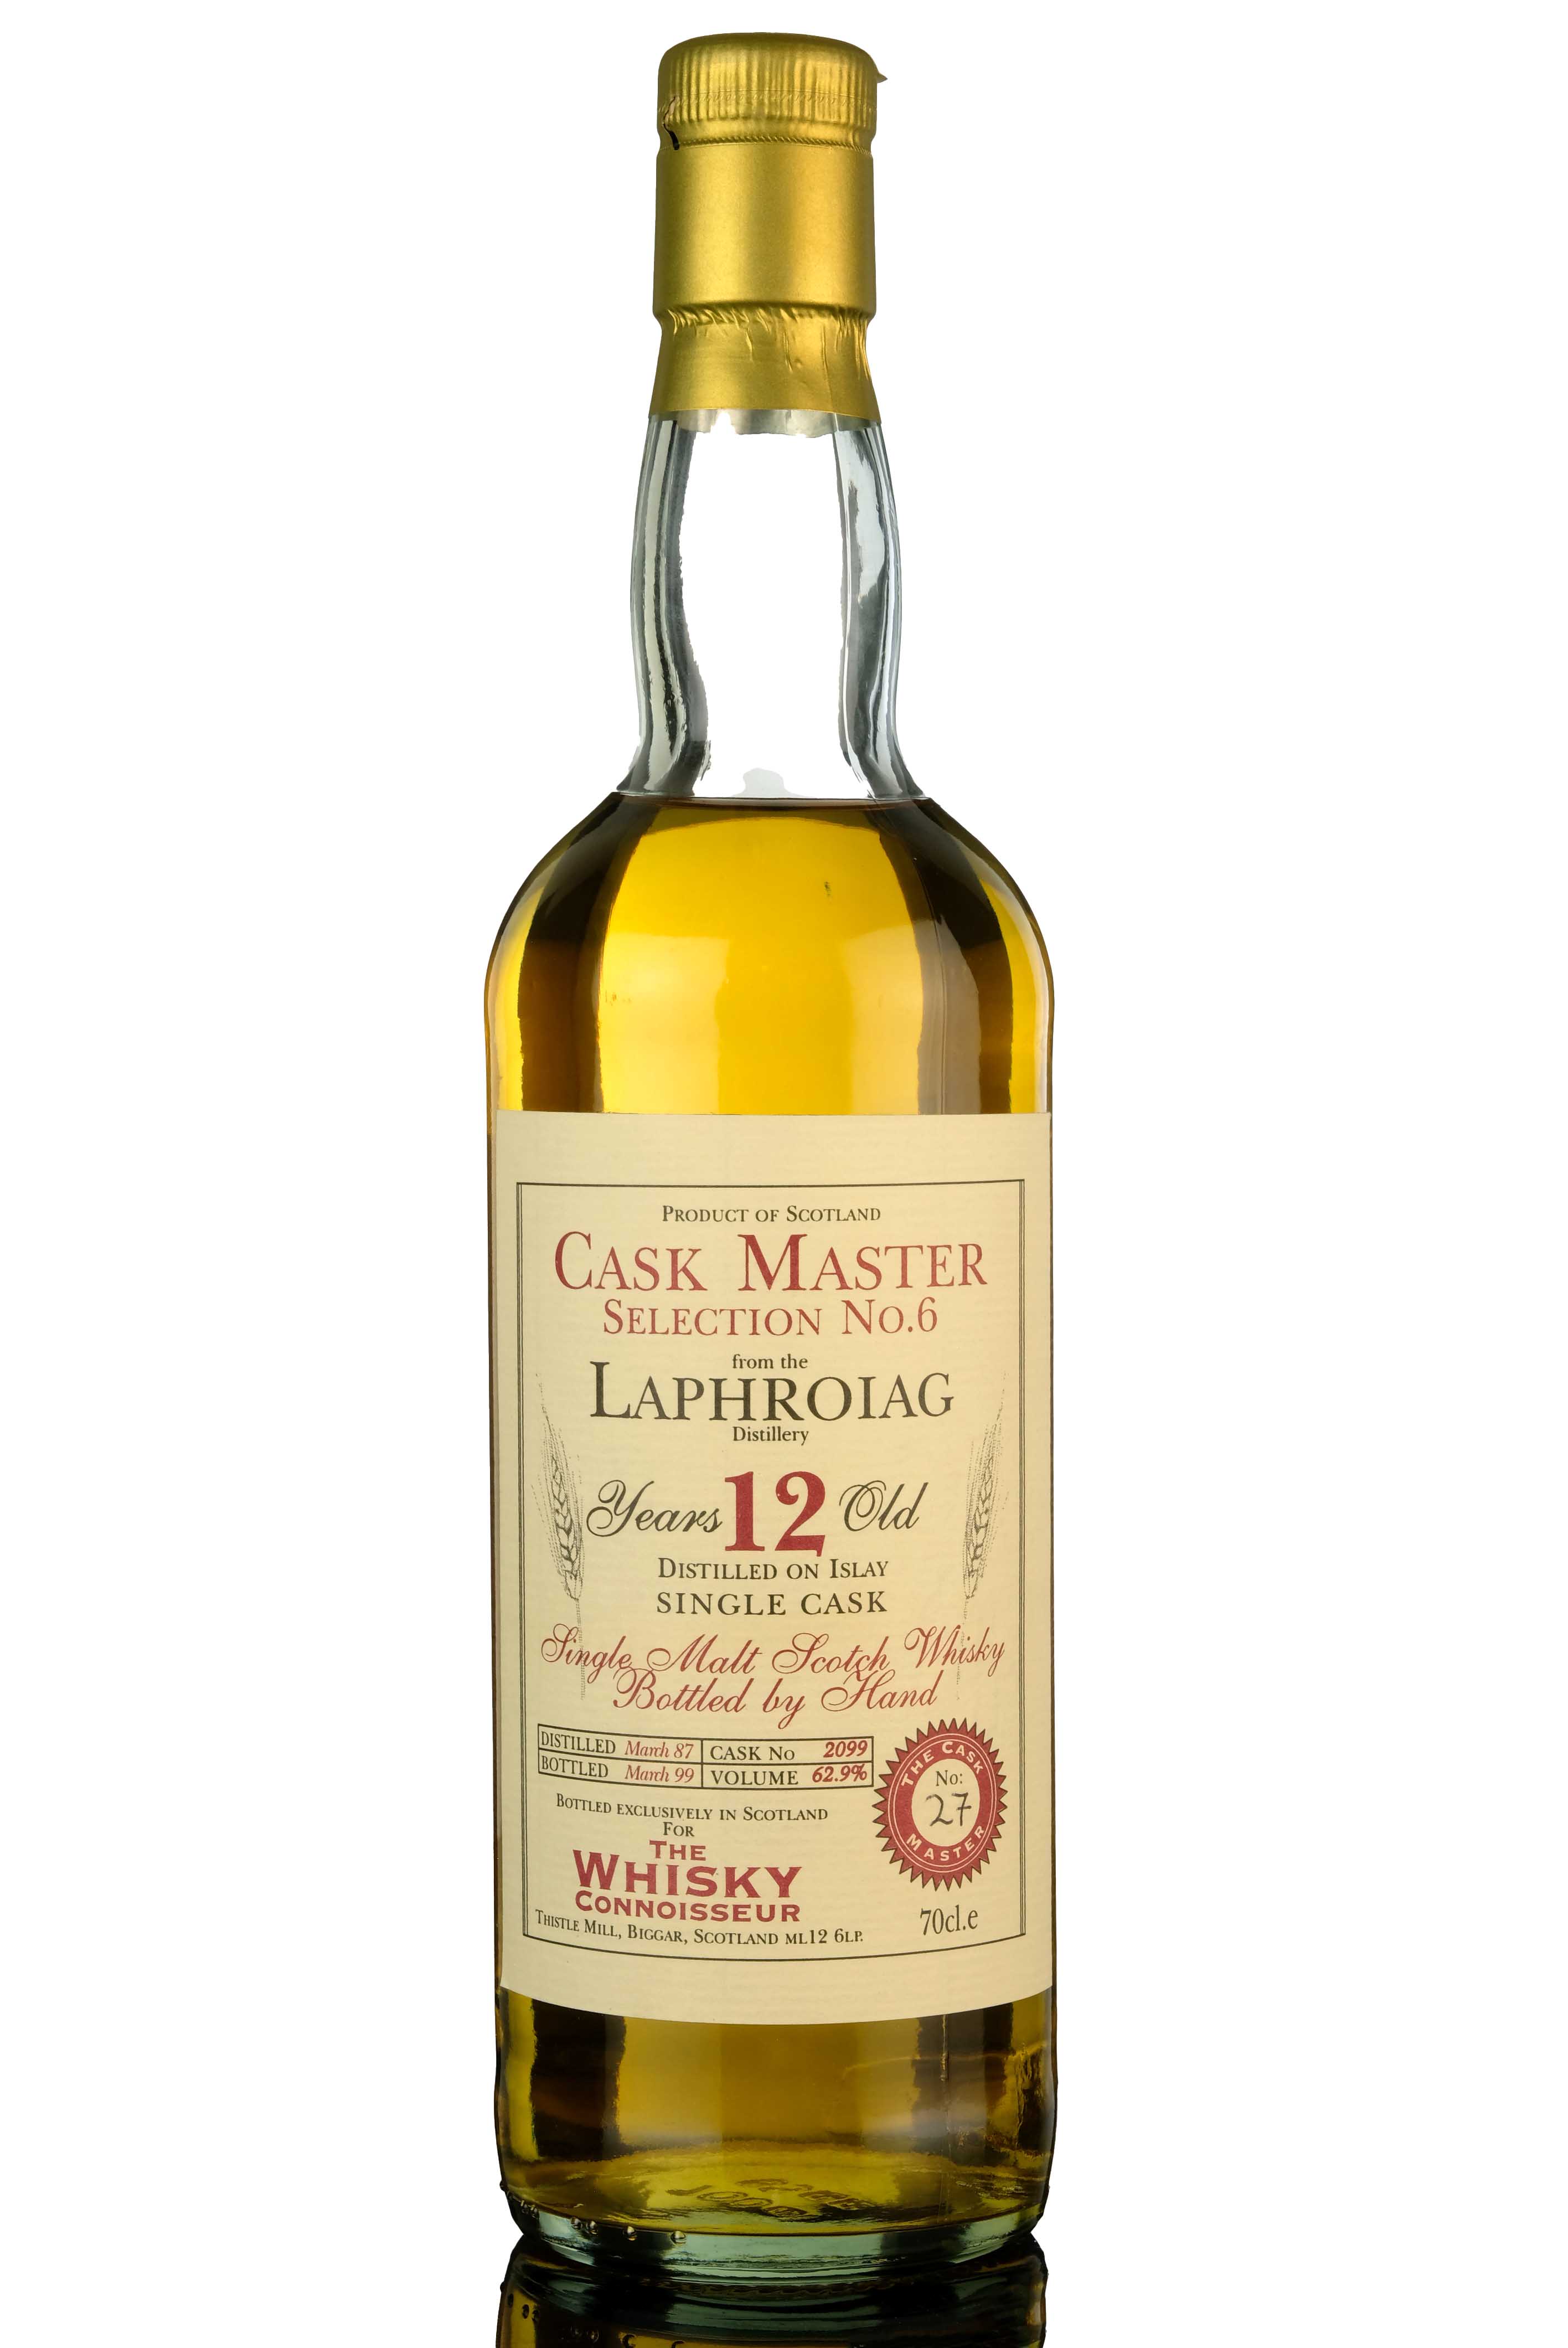 Laphroaig 1987-1999 - 12 Year Old - The Whisky Connoisseur Cask Master - Single Cask 2099